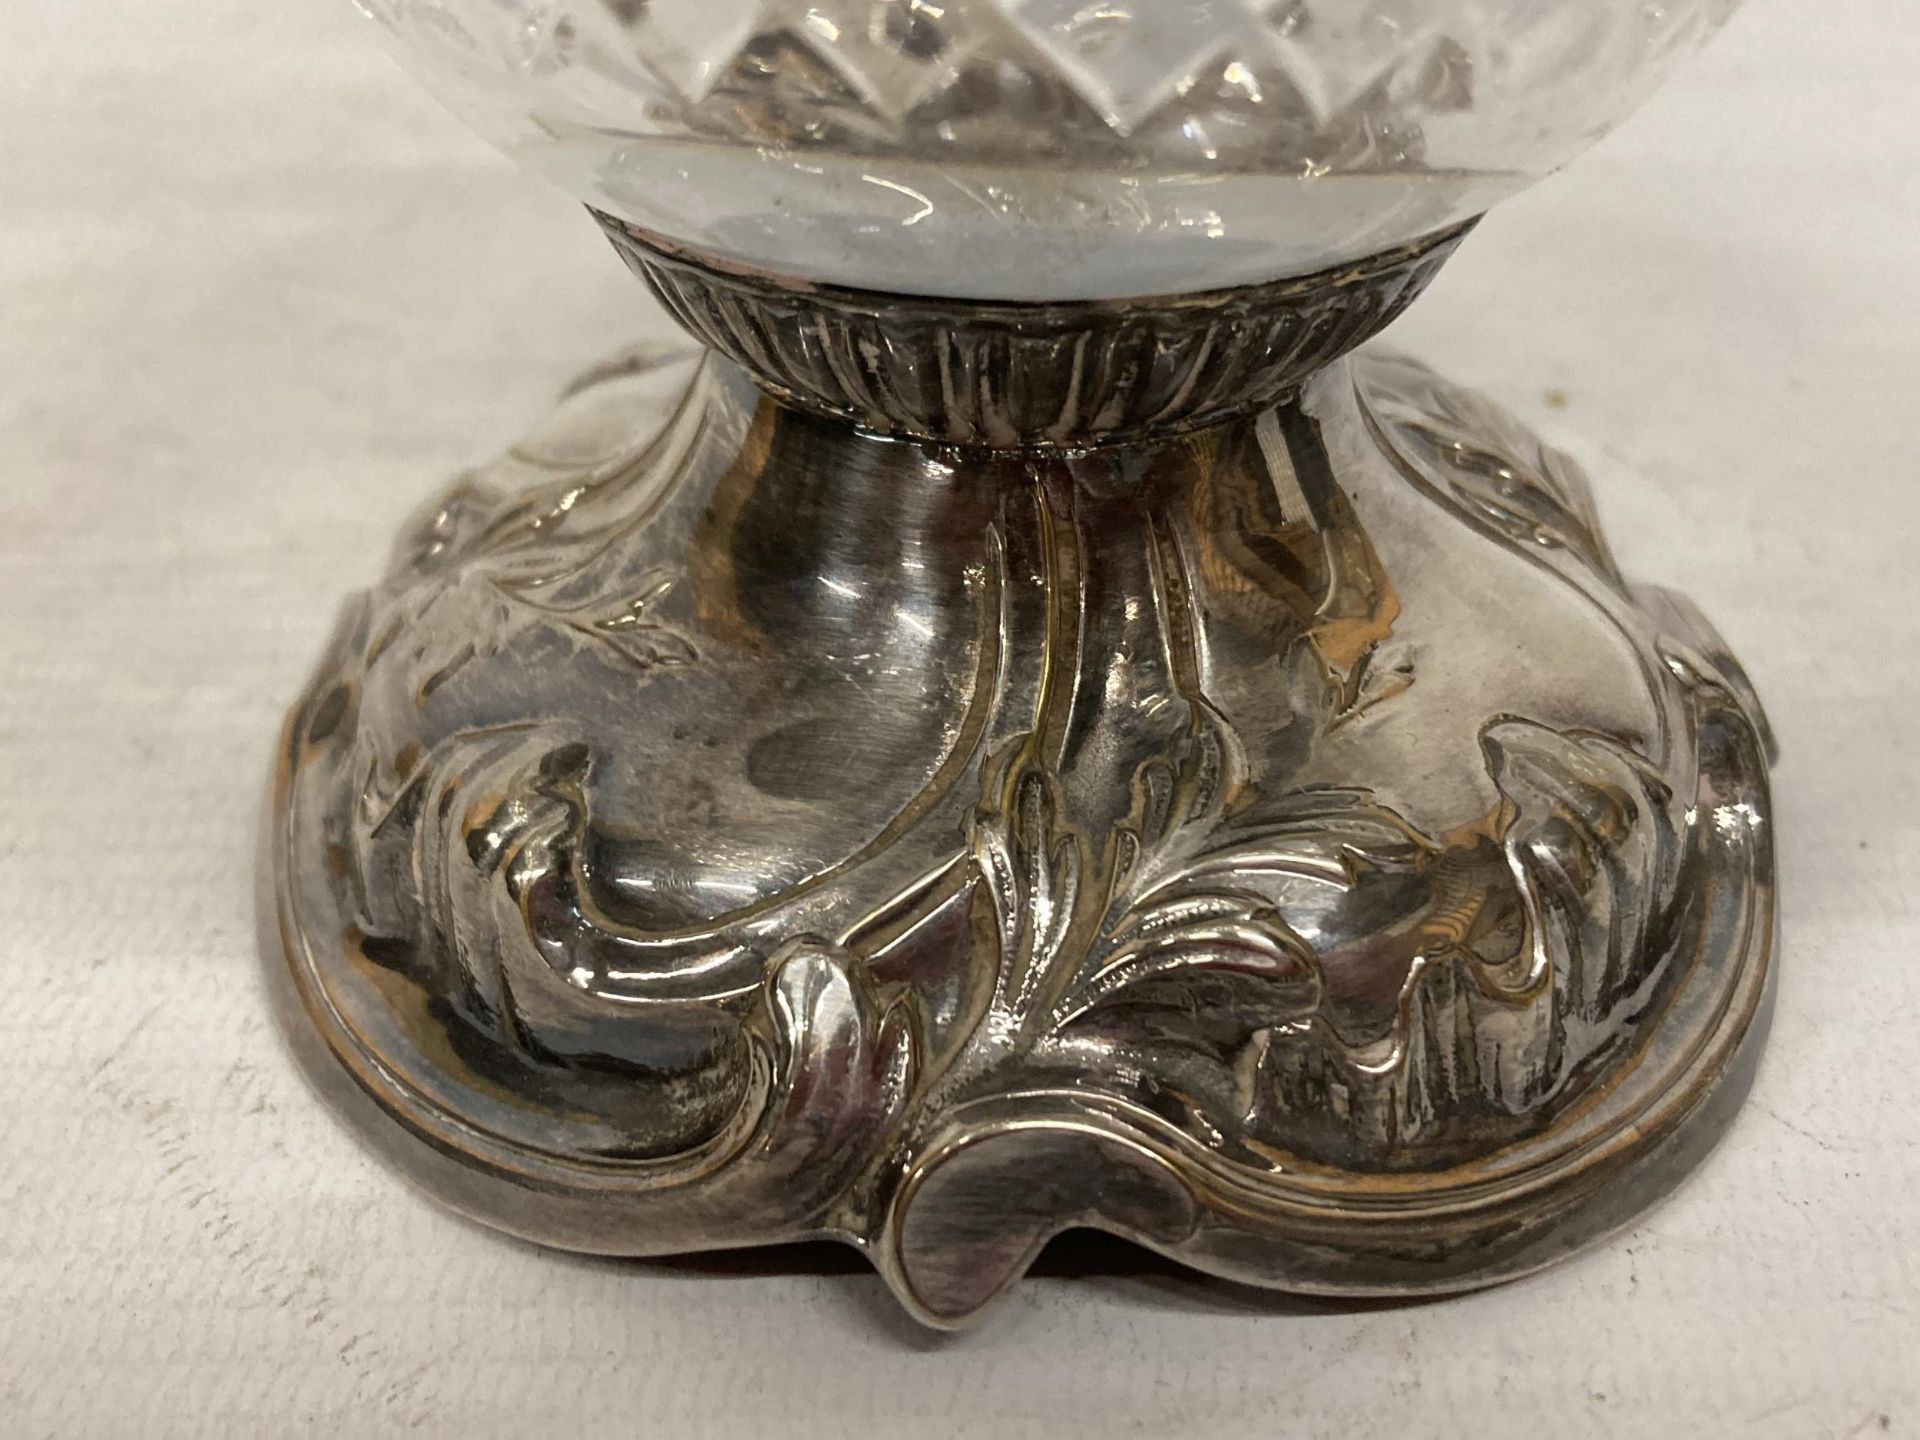 AN ORNATE SILVER PLATED AND CUT GLASS CLARET JUG - Image 5 of 6